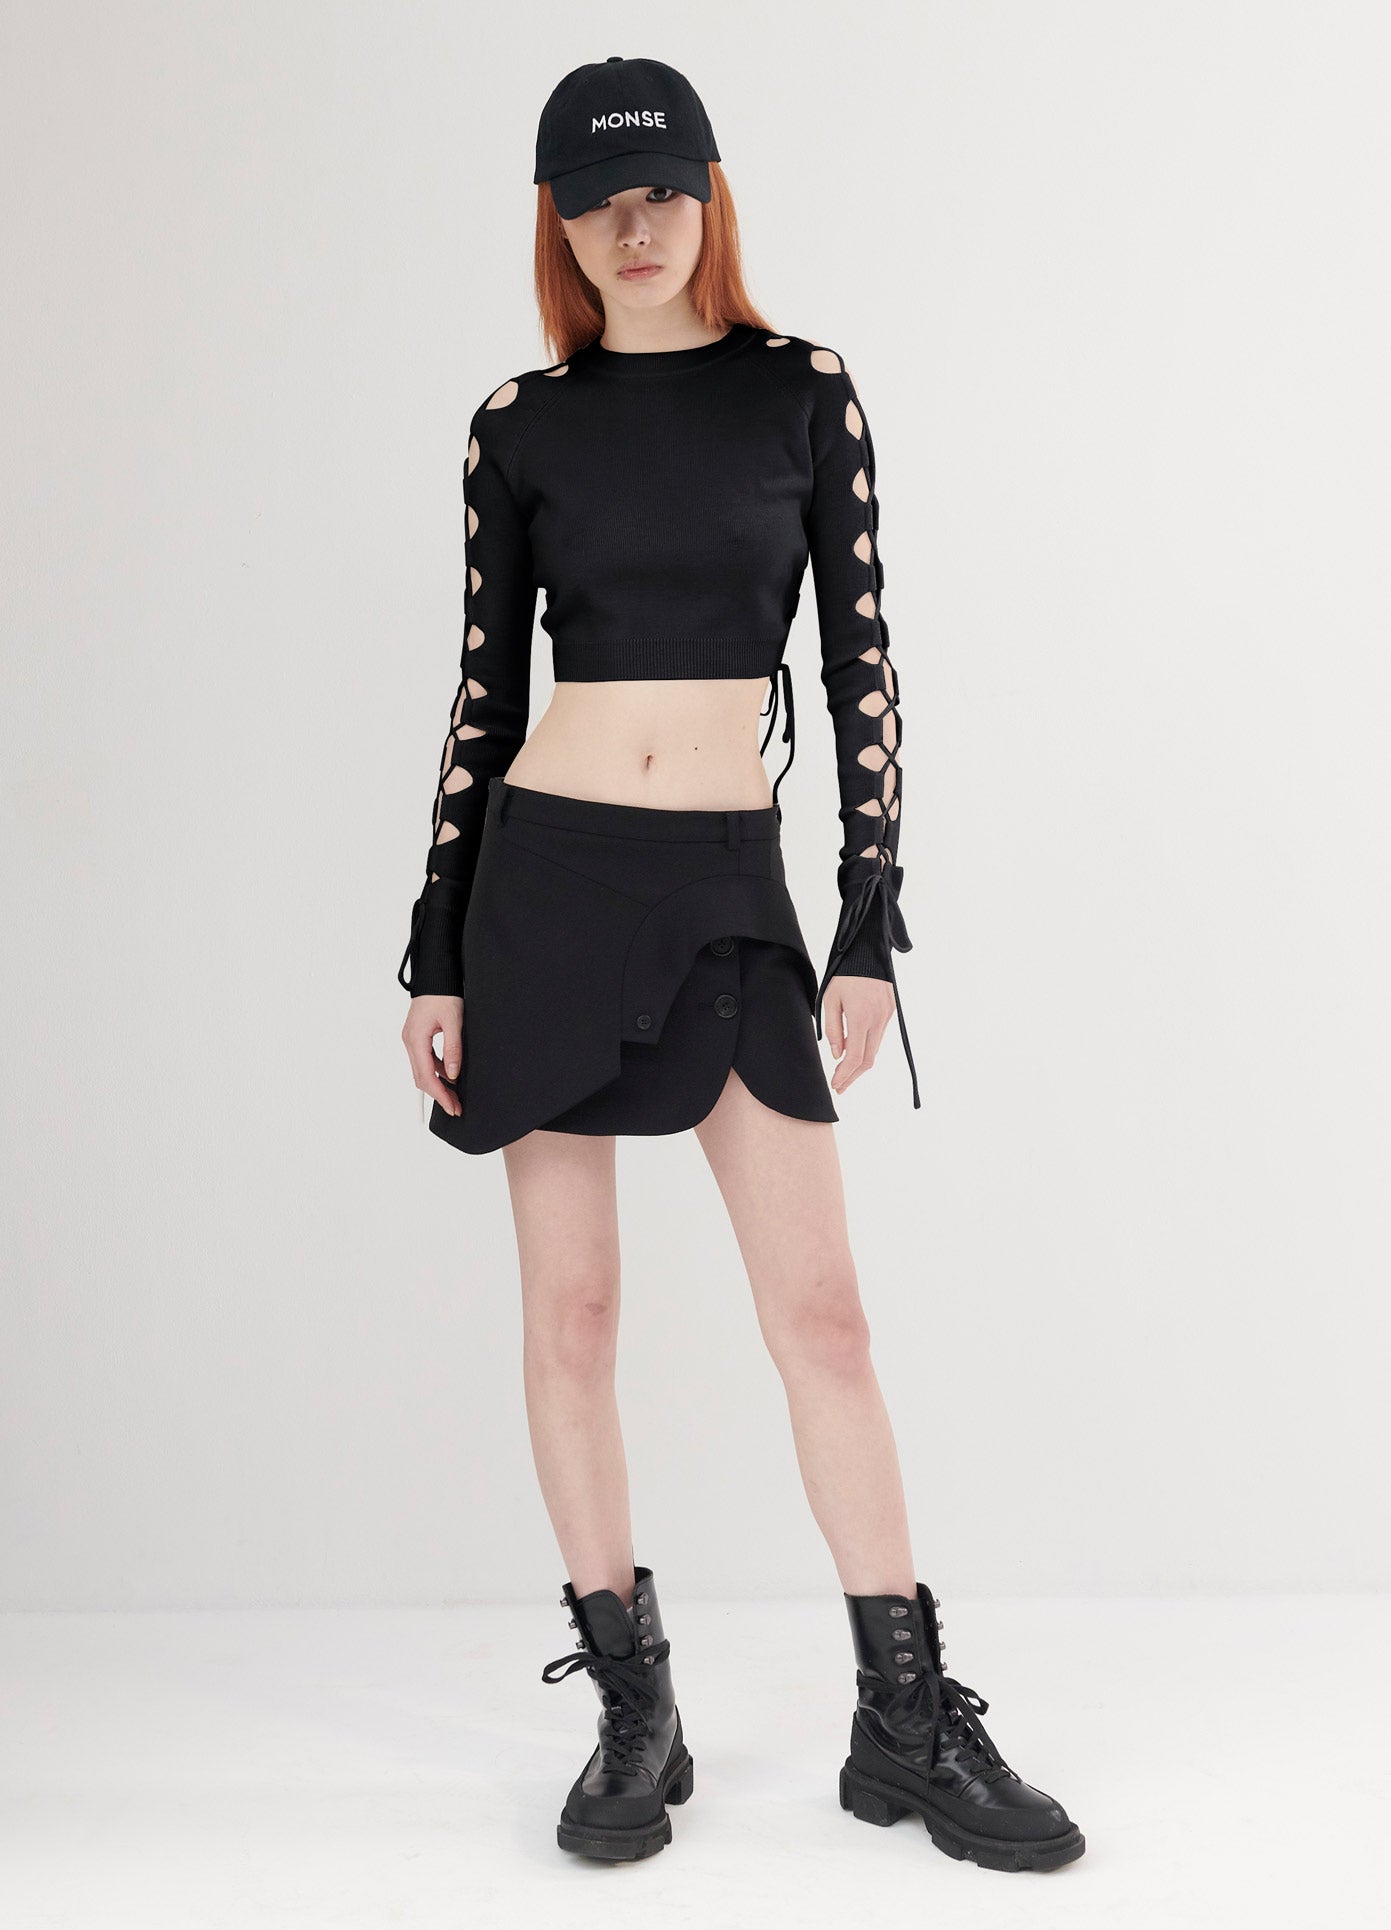 MONSE Lacing Sleeve Detail Cropped Sweater in black on model front view